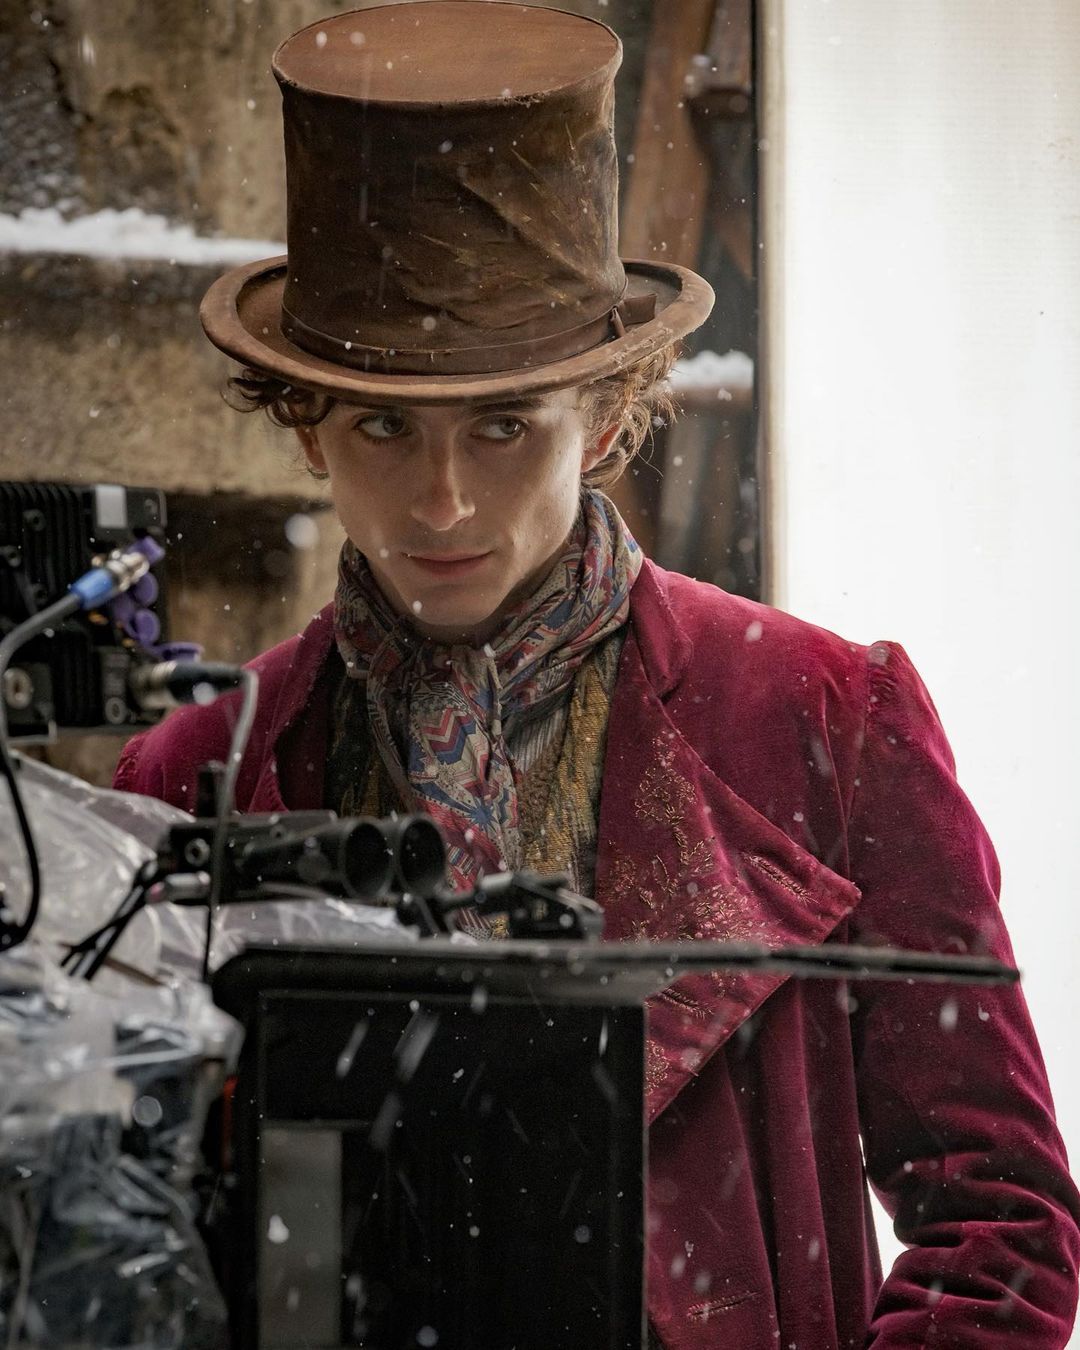 Timothe Chalamet’s Willy Wonka look receives mixed response